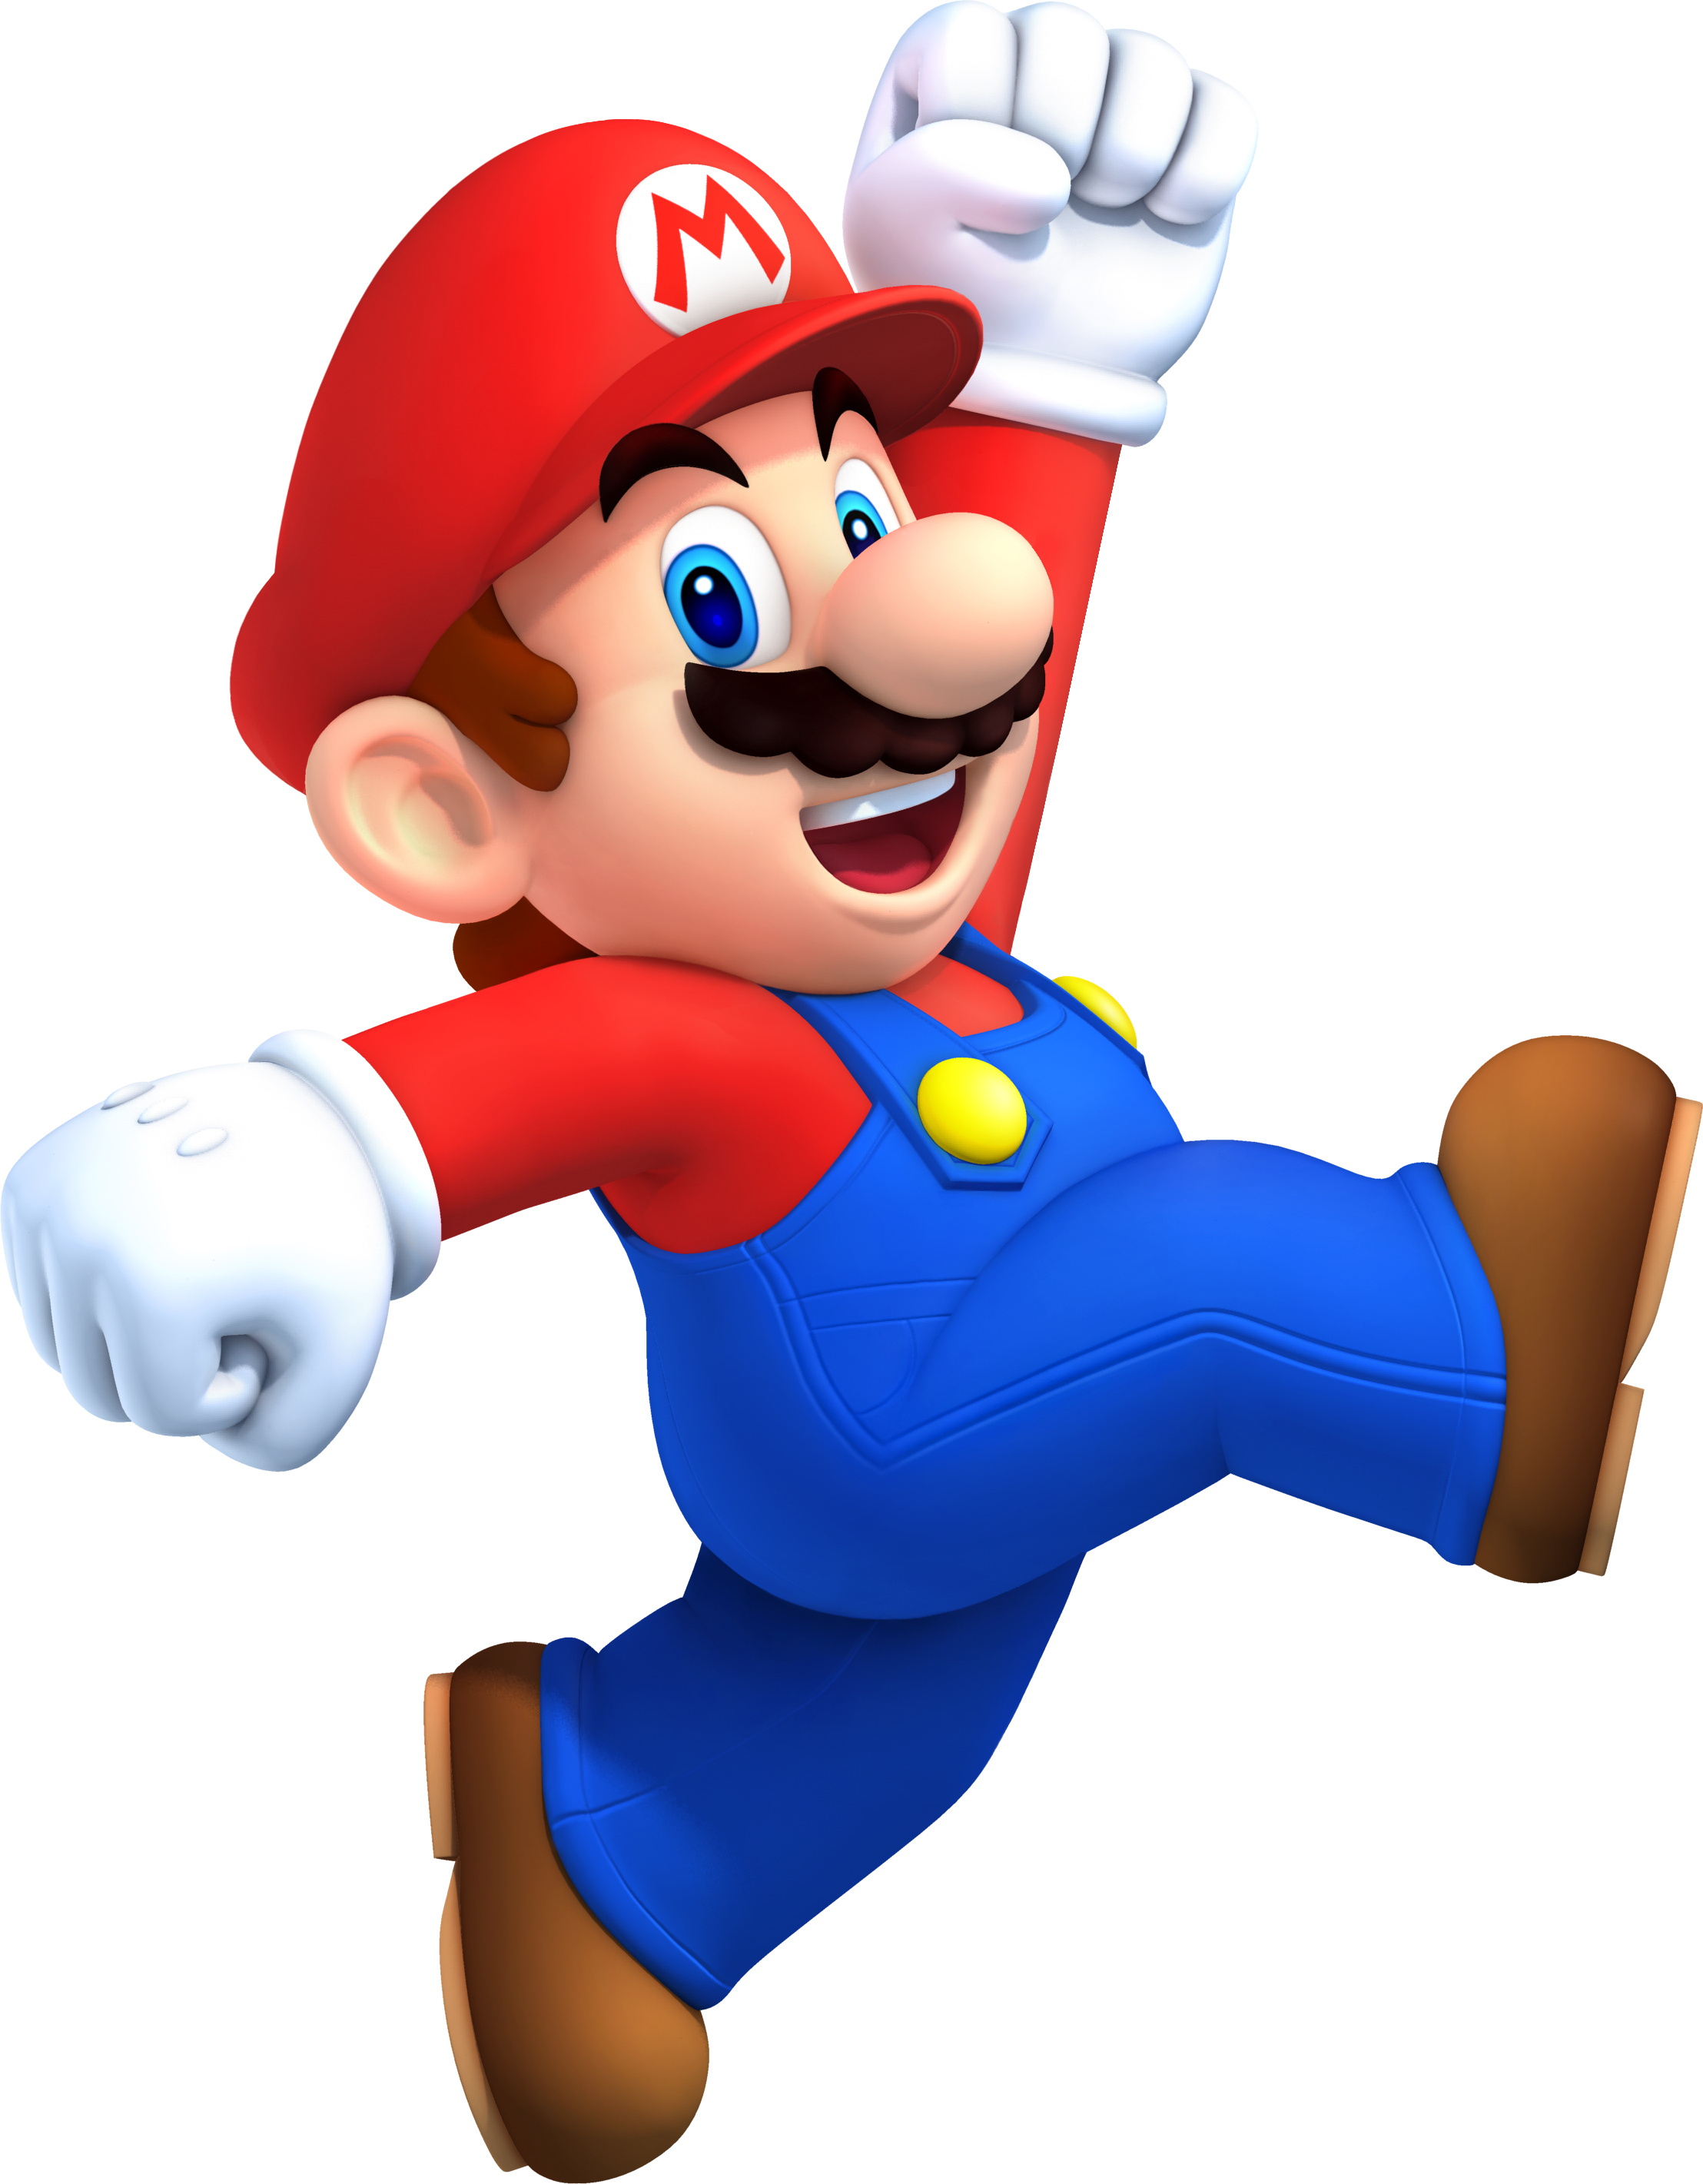 http://img4.wikia.nocookie.net/__cb20120816162009/mario/images/1/15/MarioNSMB2.png